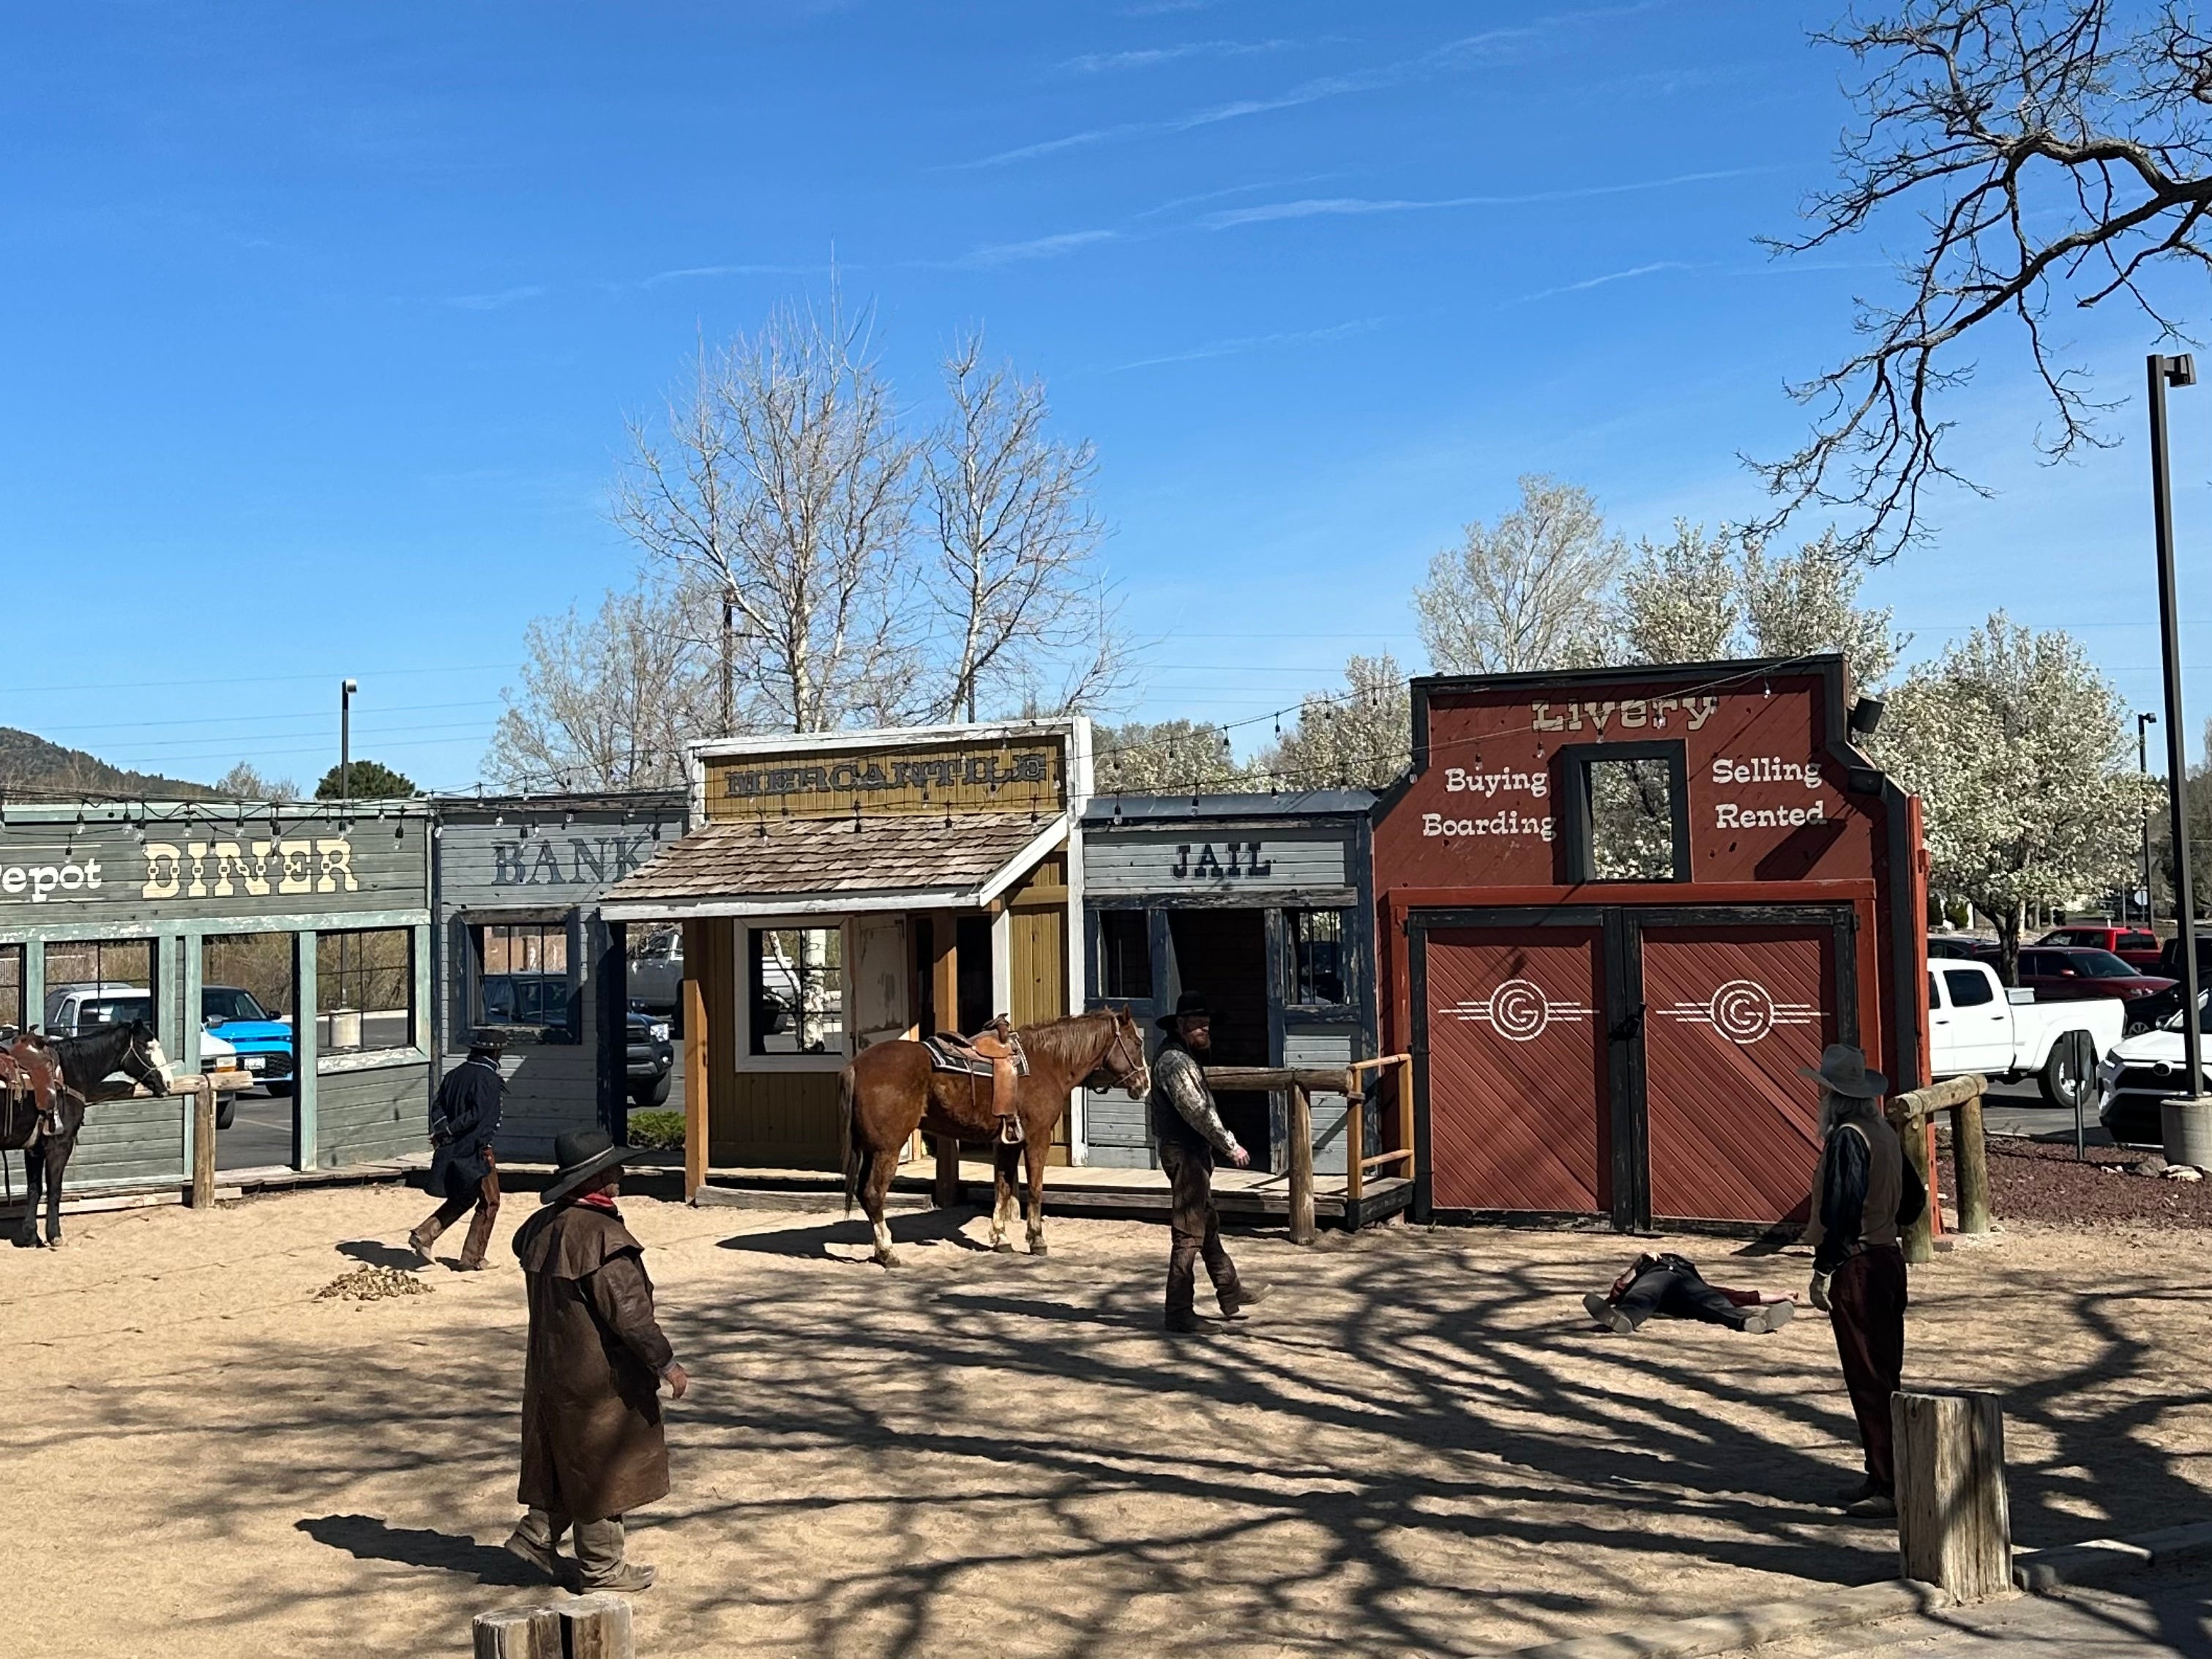 Williams railway depot’s faux Old West town